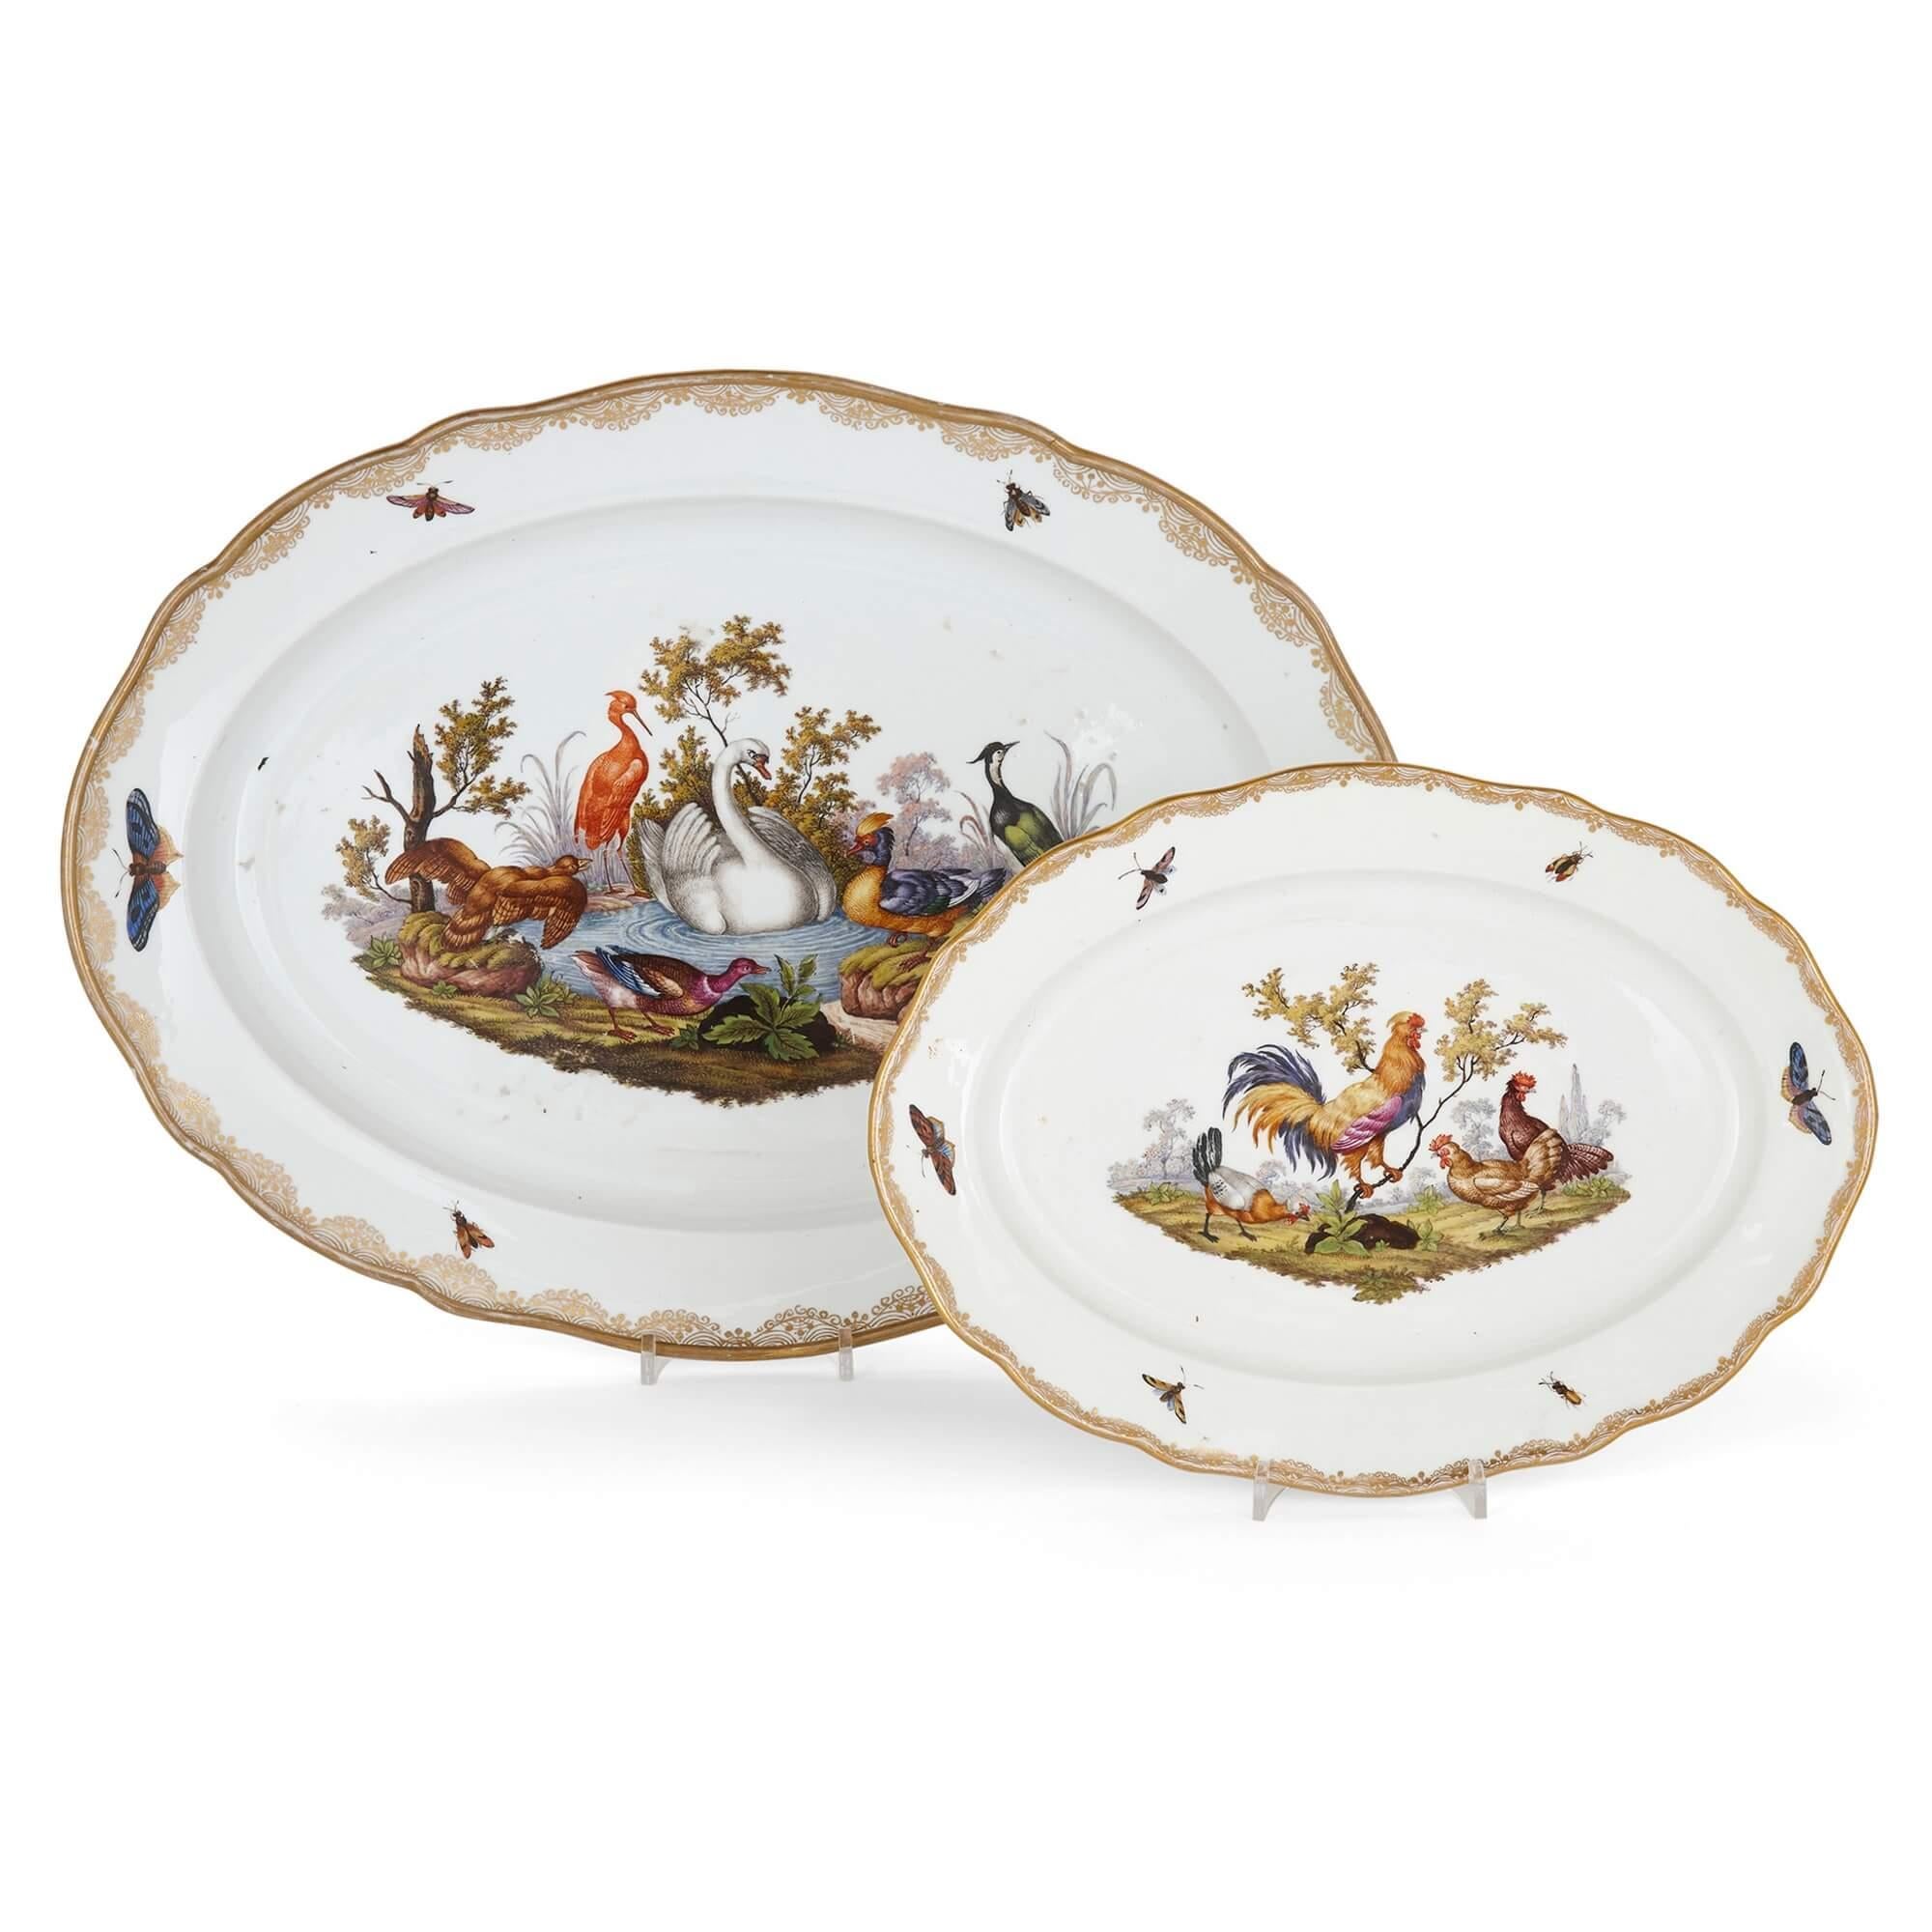 Rococo Very fine and extensive Meissen Porcelain Dinner Service